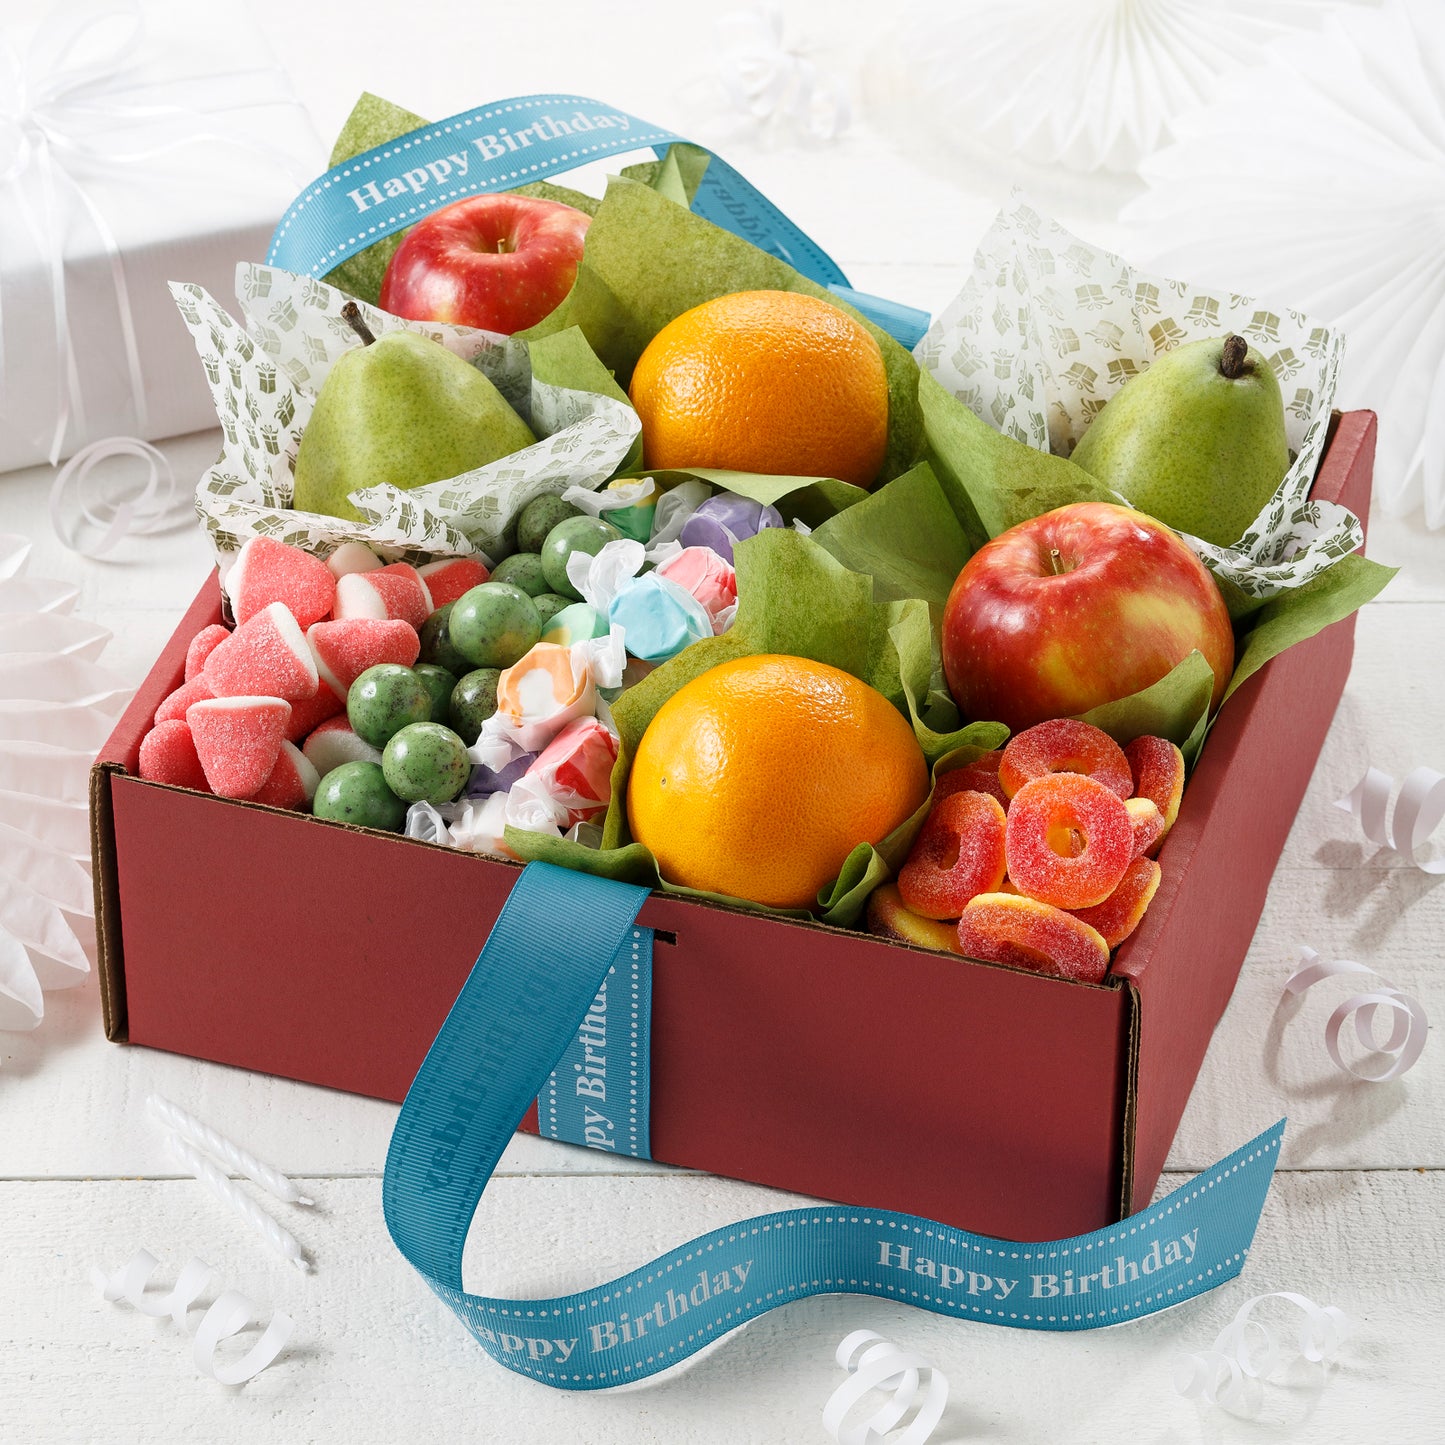 A red box filled with apples, pears, oranges and an assortment of candies with a blue happy birthday ribbon.